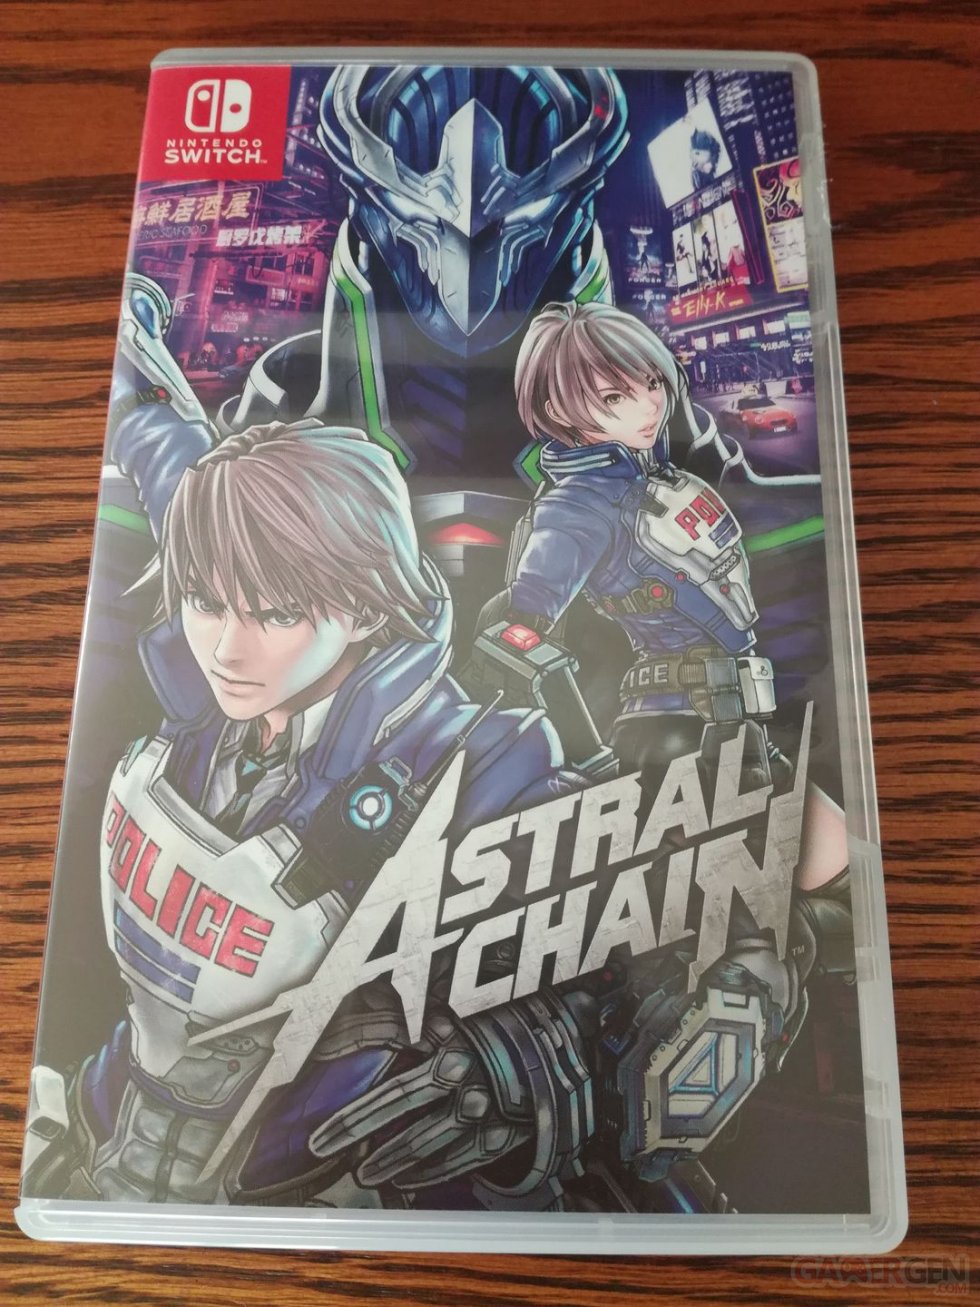 Astral-Chain-unboxing-déballage-collector-08-04-09-2019